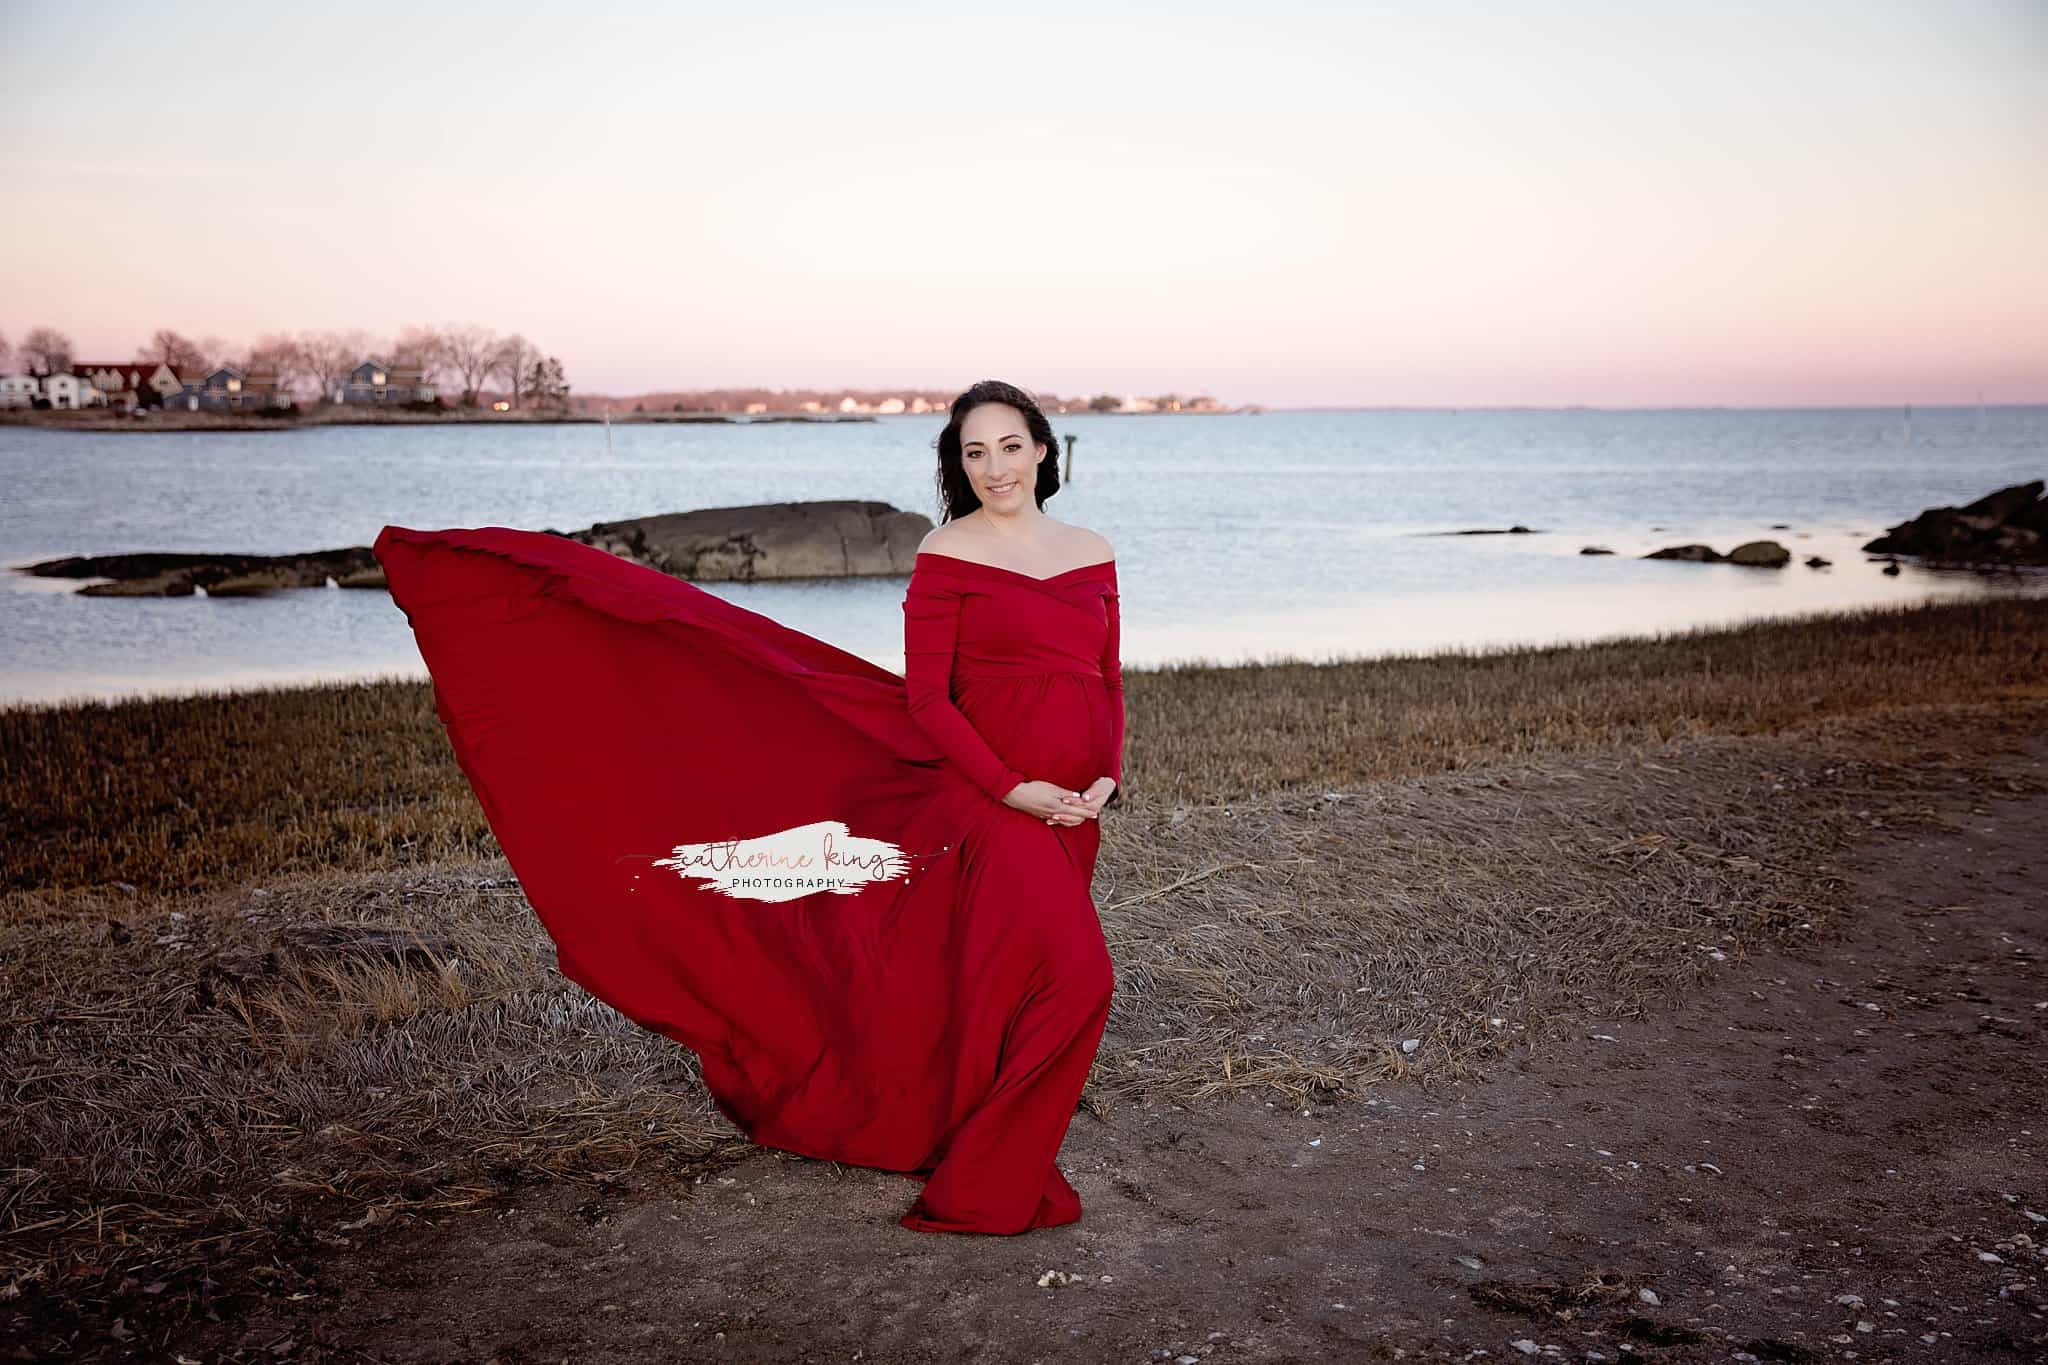 Winter Beach Sunset Maternity photoshoot in Guilford CT